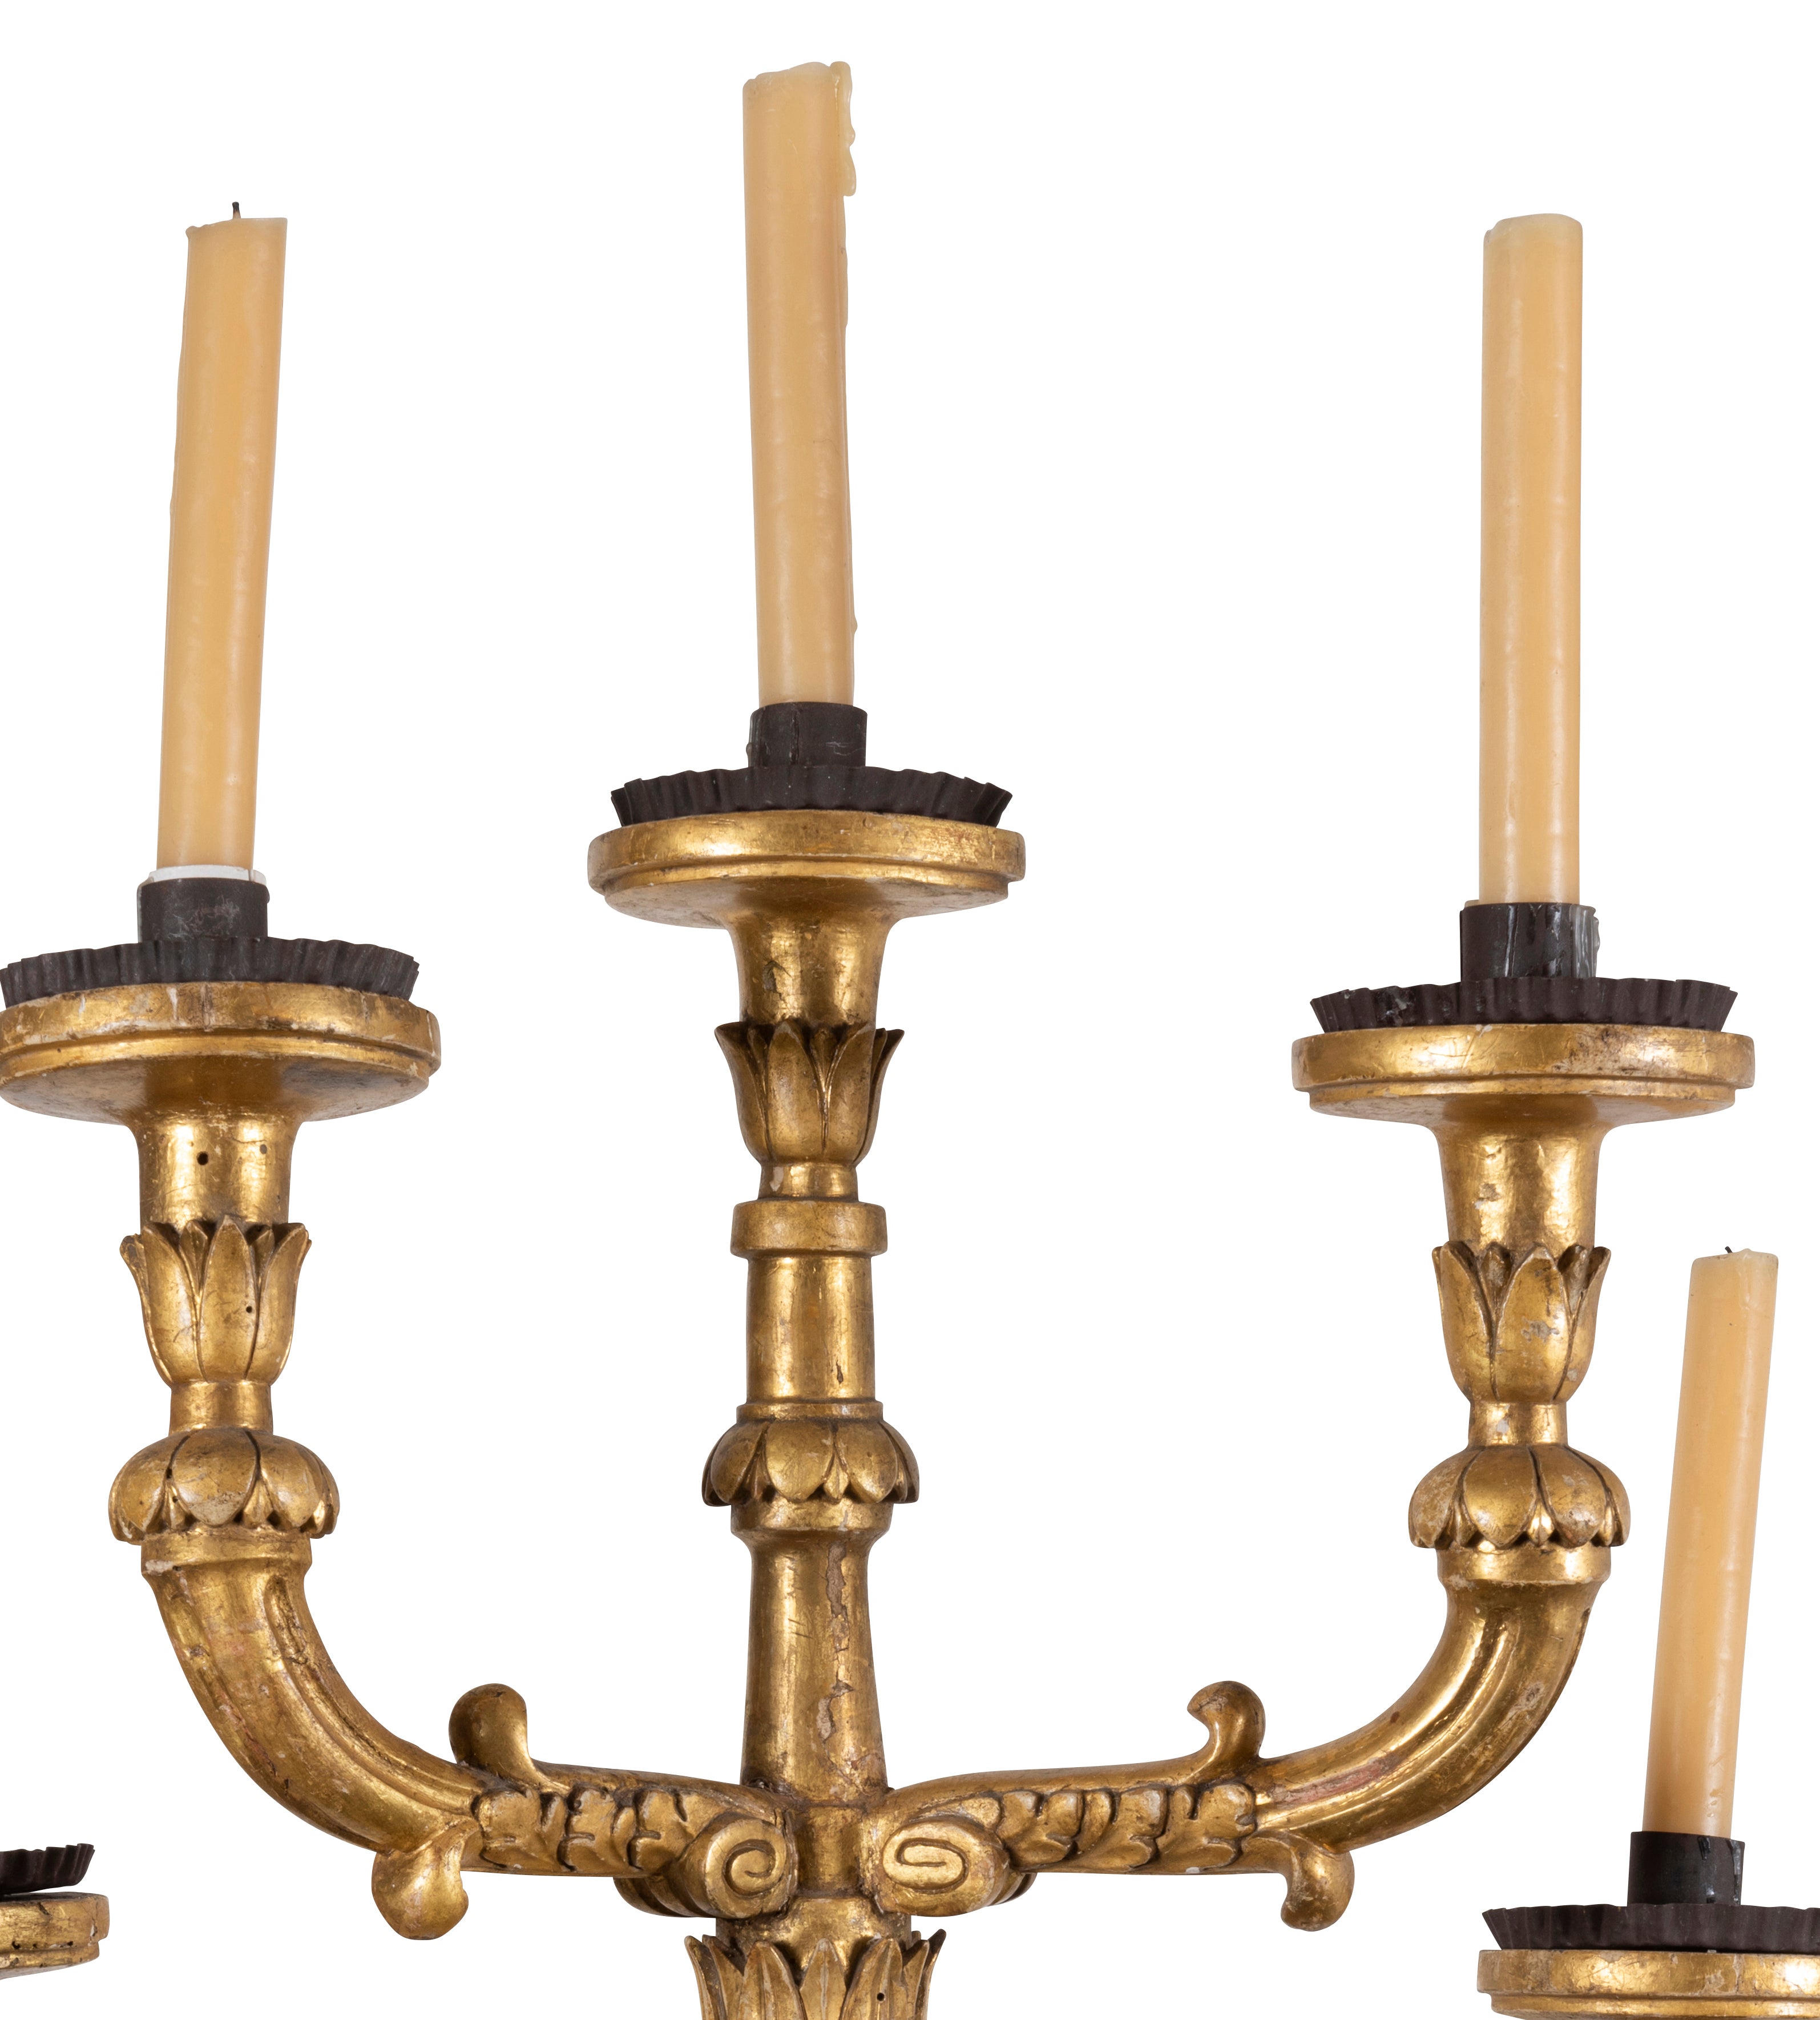 A Pair of 17th Century Spanish Carlos II Carved Giltwood Wall Sconces